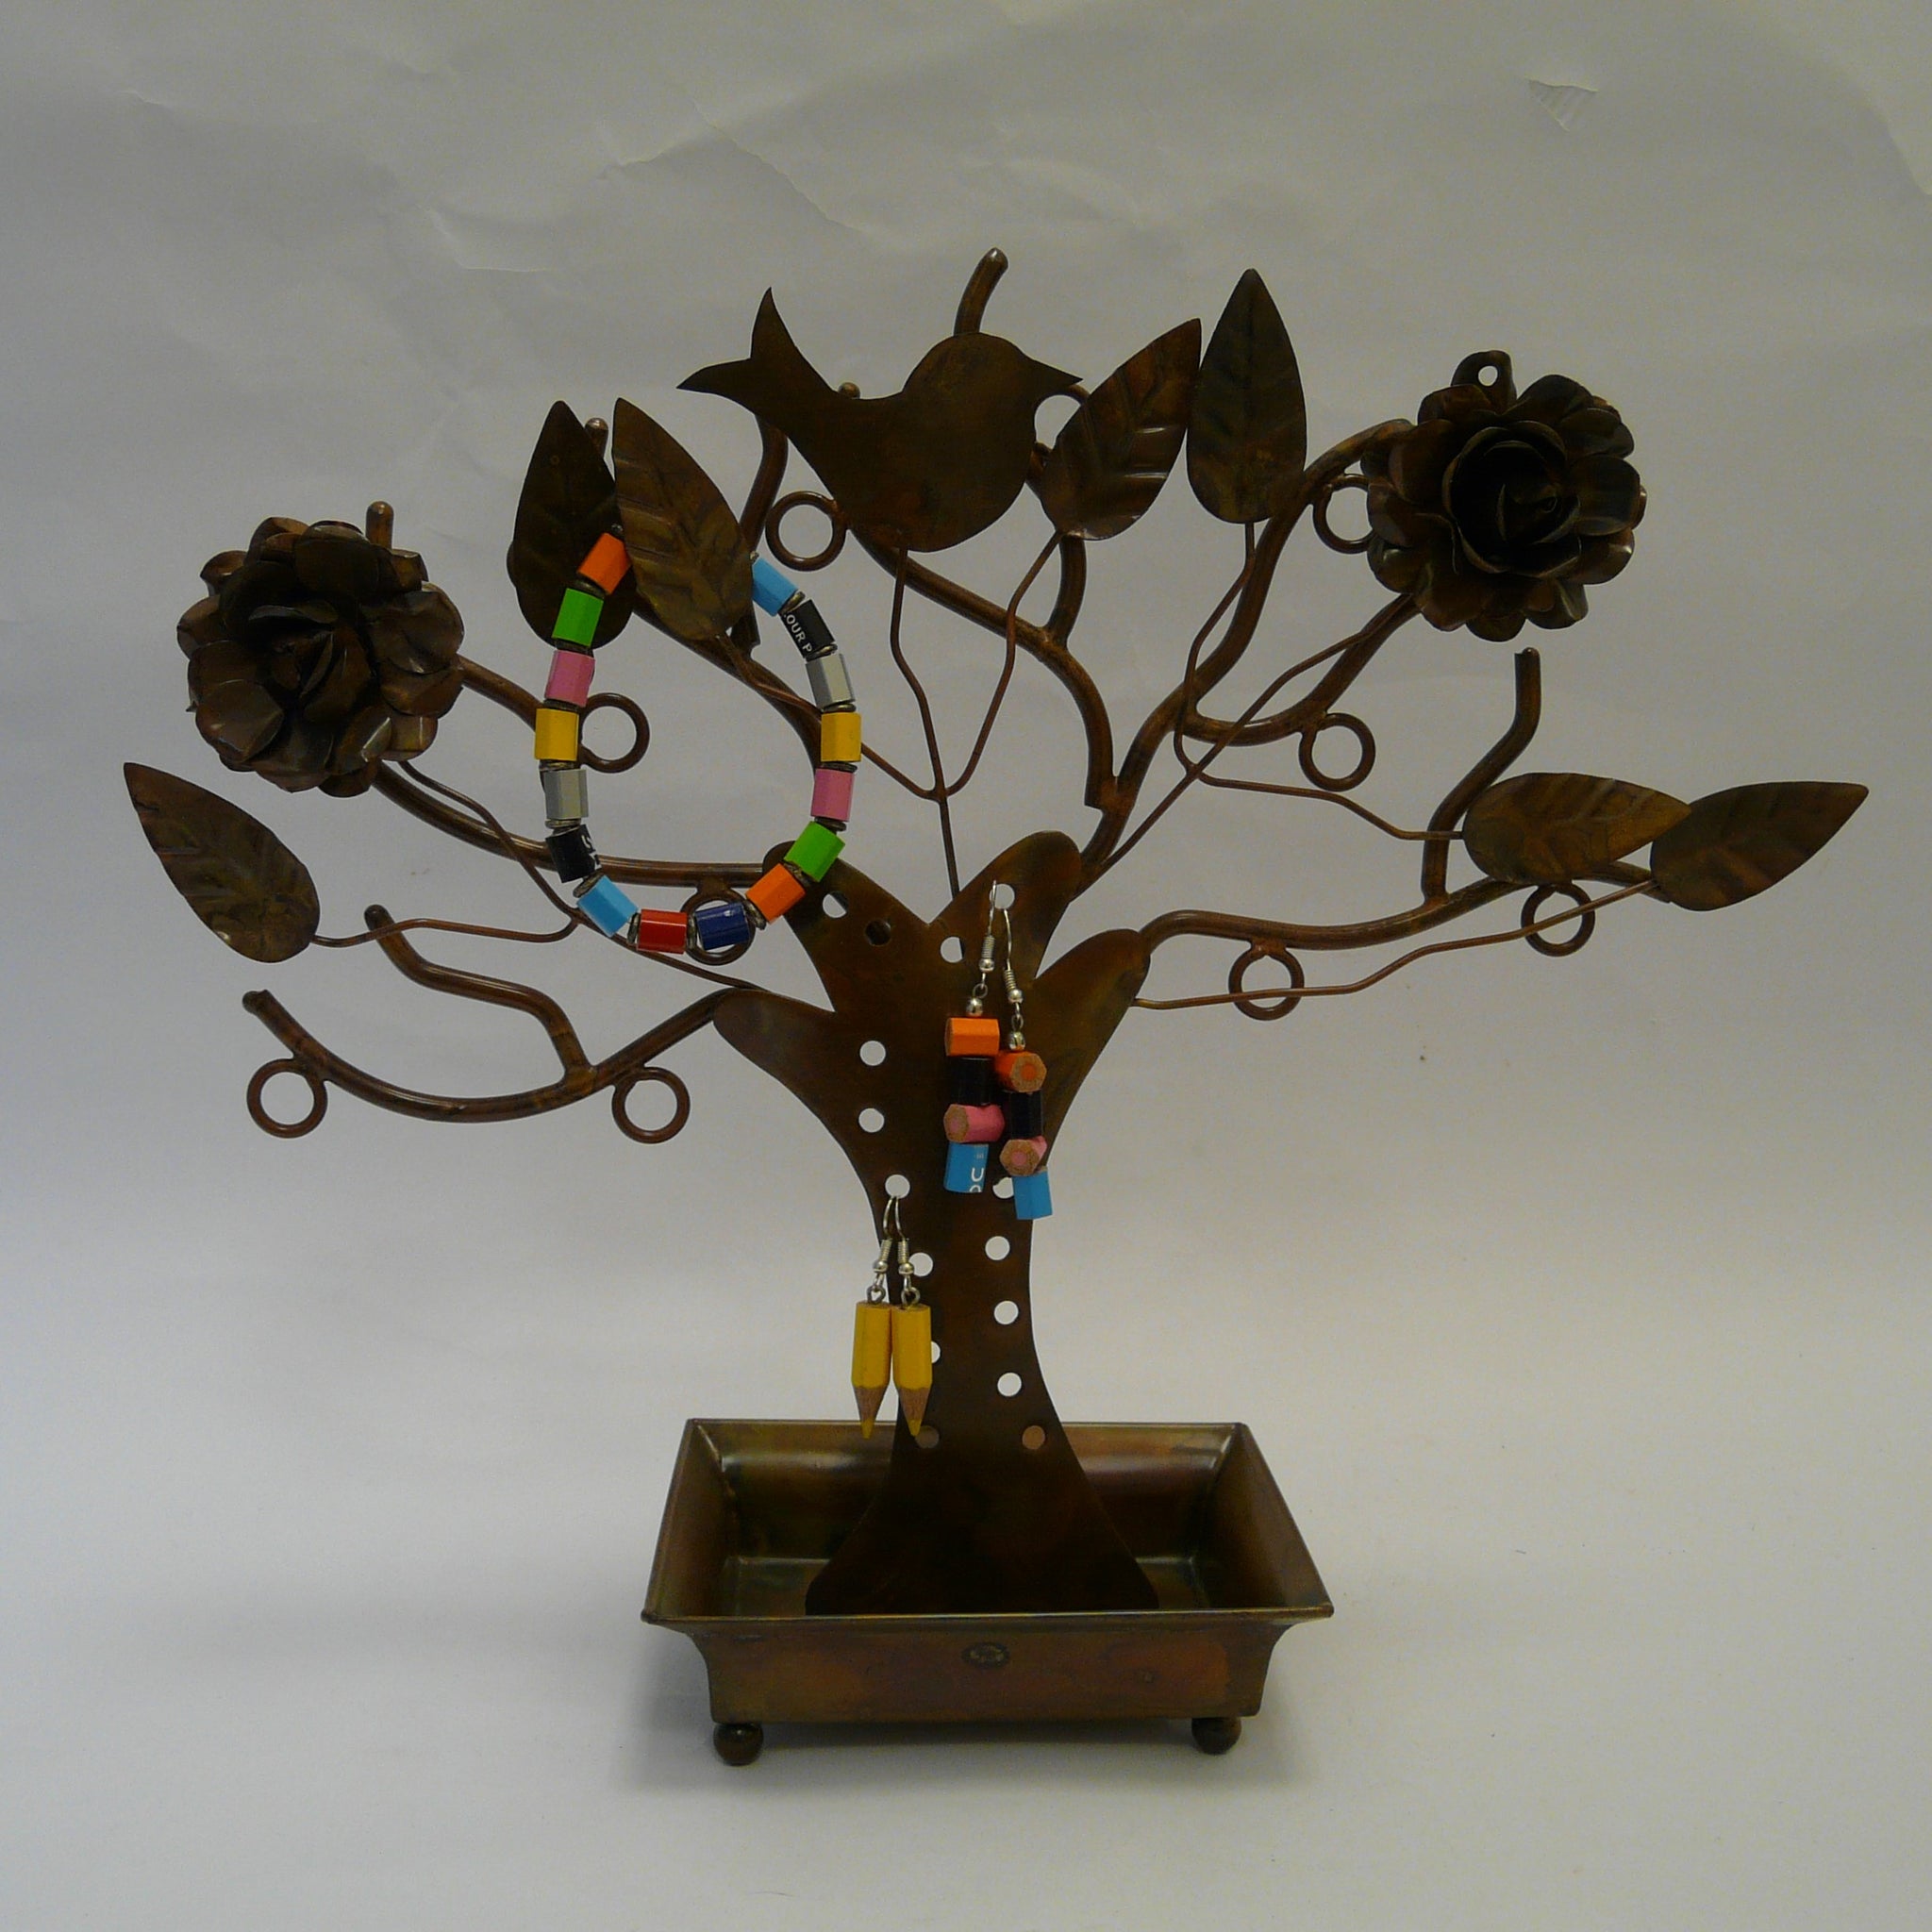 P1110468-Fair-trade-Metal-Jewellery-stand-holder-tree-with-flowers-bird-leaves-Upcycled-crayon-Earrings-bracelet.